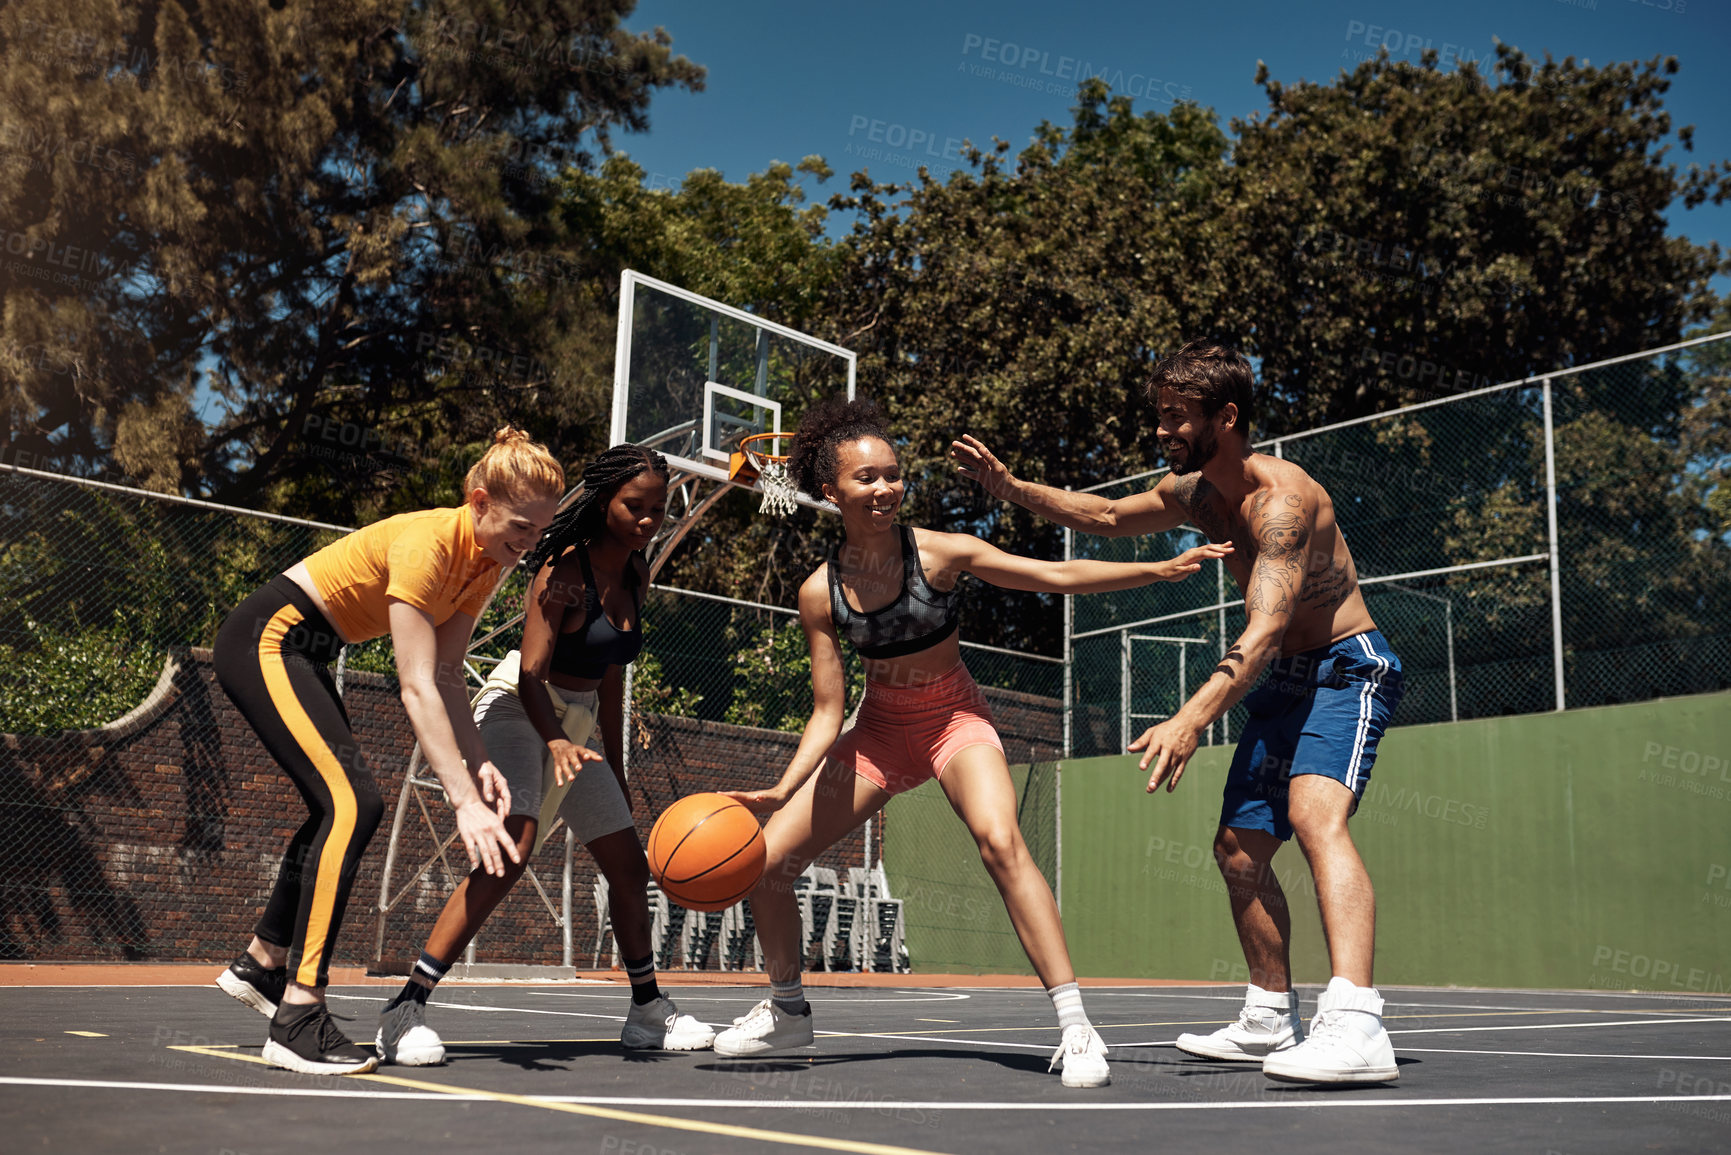 Buy stock photo Shot of a group of sporty young people playing basketball on a sports court